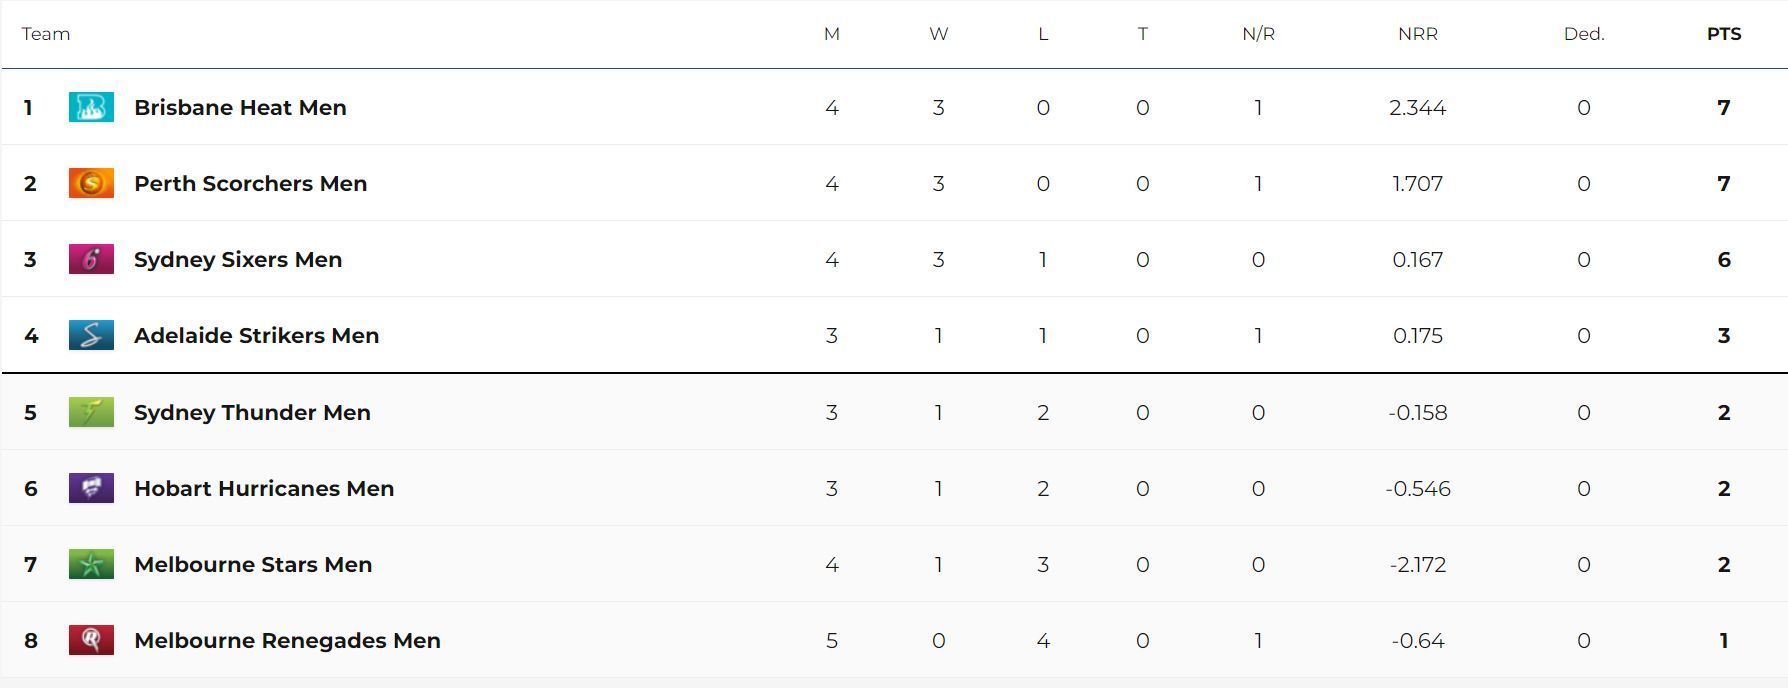 Updated Points Table after Match 15 (Image Courtesy: cricket.com.au)